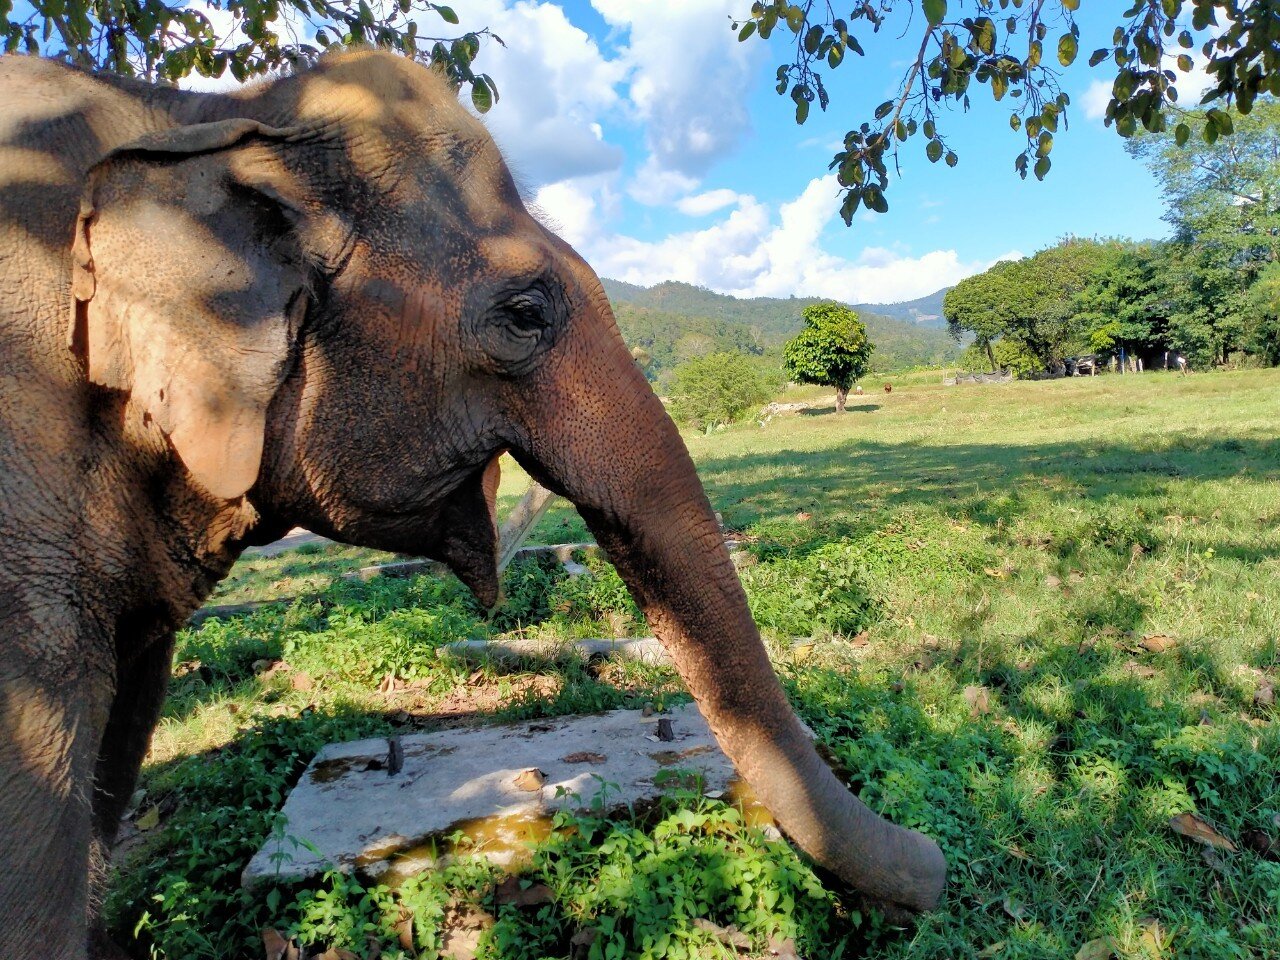 An elephant with its trunk up in the grass can be found in the Elephant Freedom Project's Image Gallery.